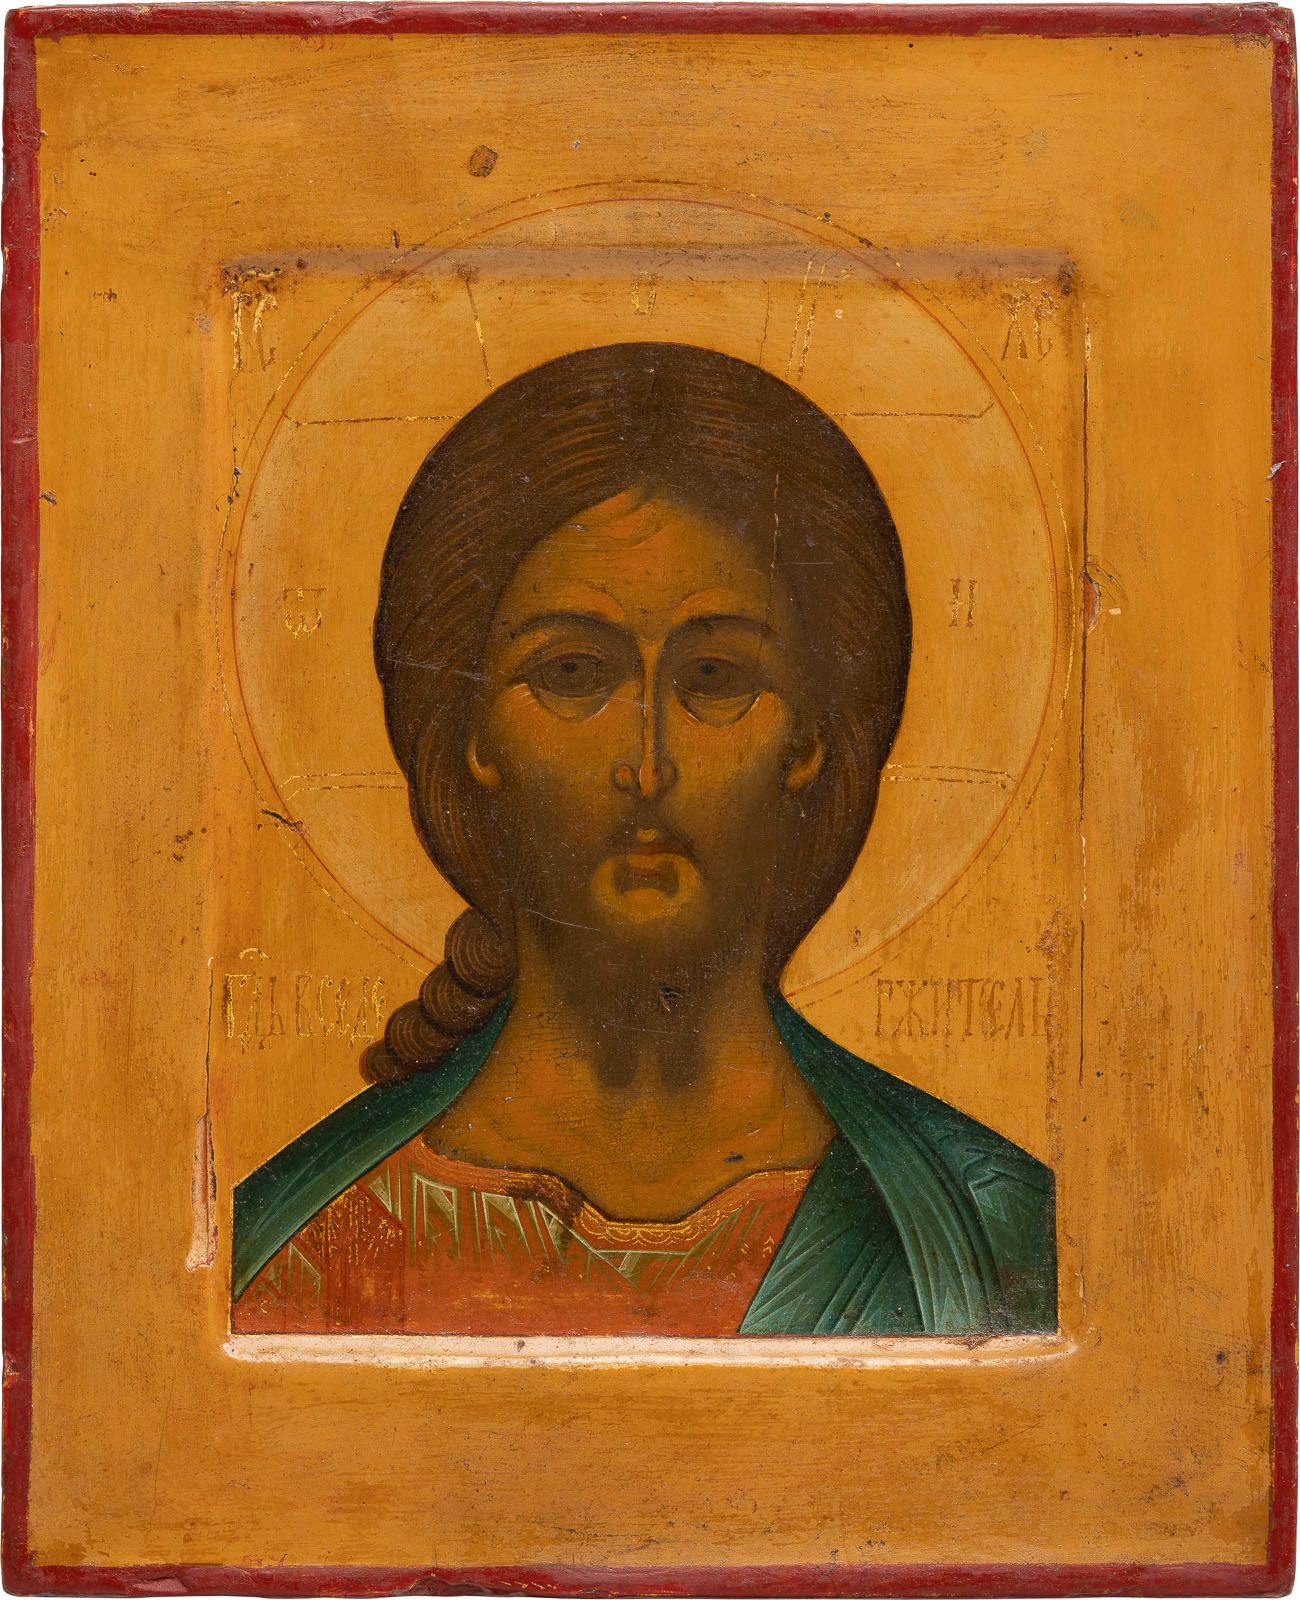 A SMALL ICON SHOWING CHRIST 'WITH THE FEARSOME EYE' UN PEQUEÑO ICONO QUE MUESTRA&hellip;